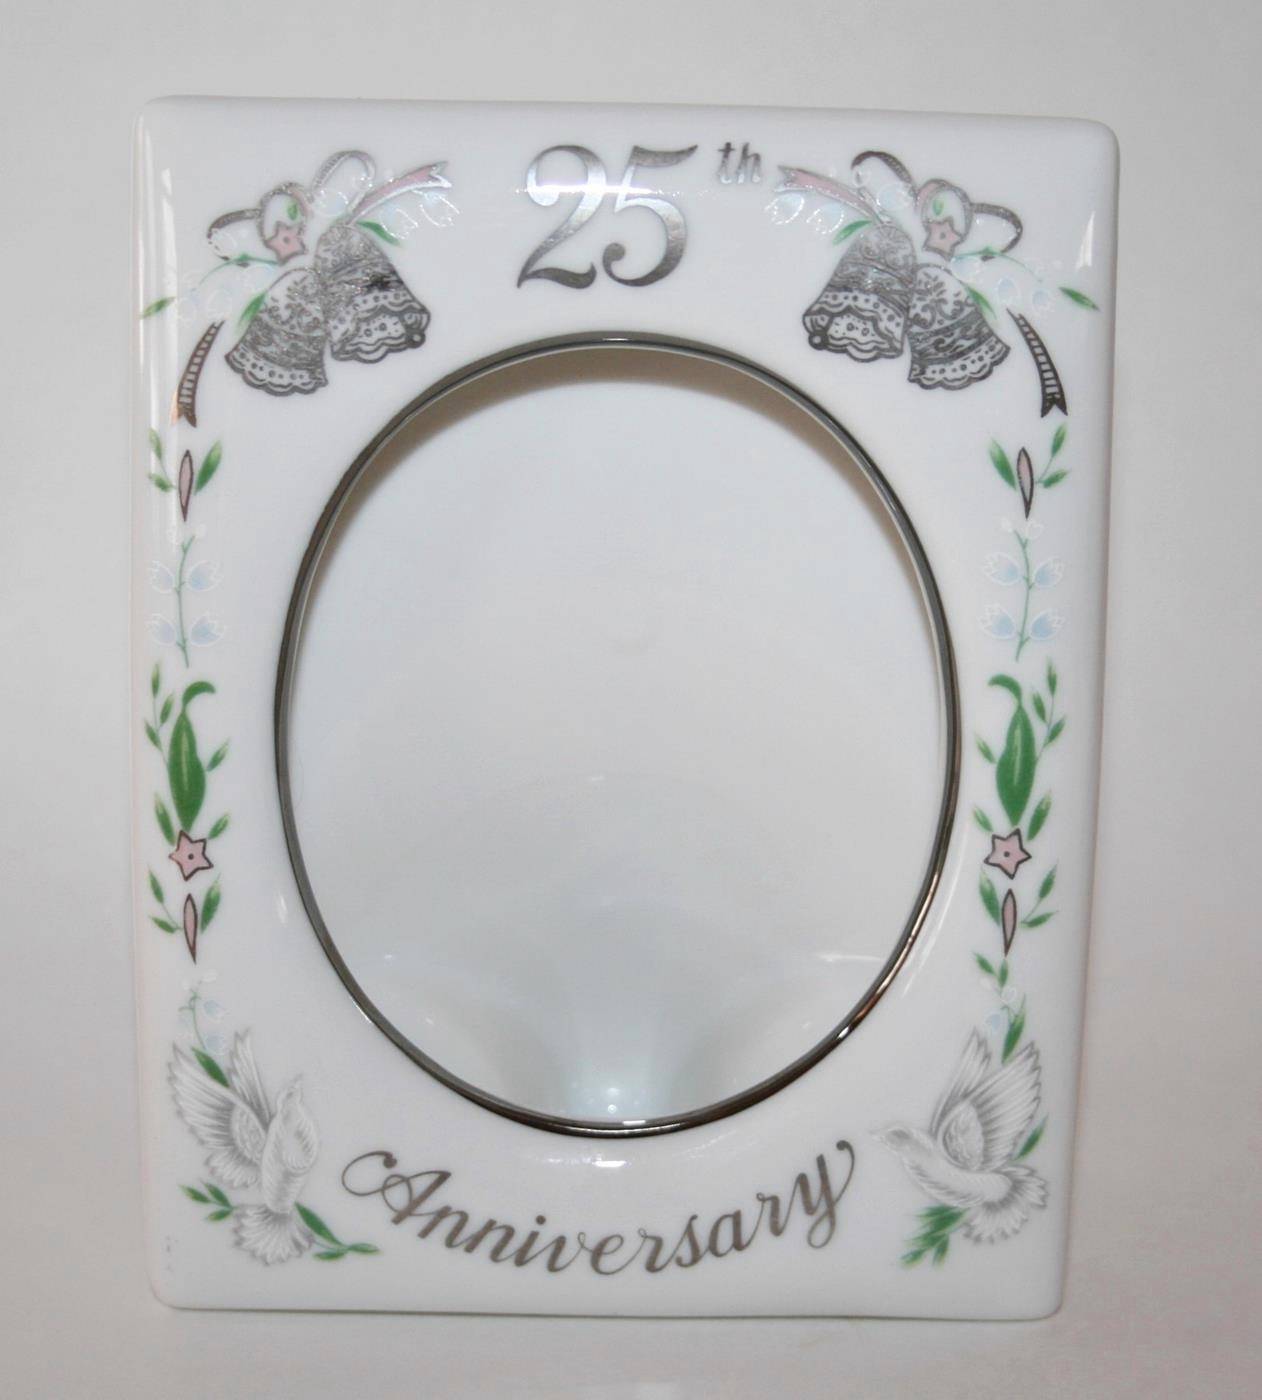 Primary image for 1984 Lefton China 25th Wedding Anniversary Photo Frame Never Used #1616